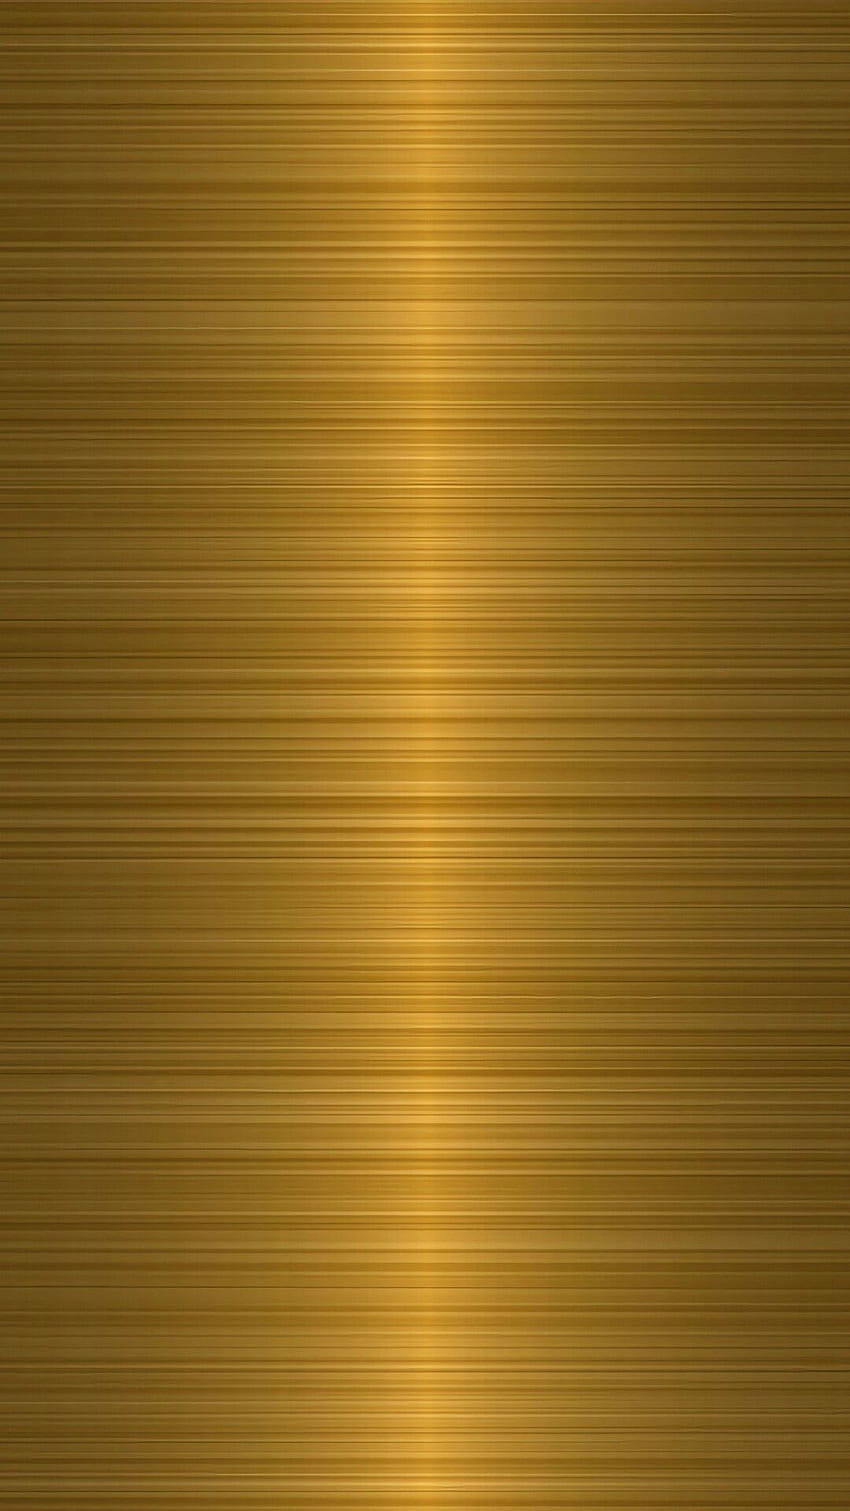 Gold & golden color art textures patterns background, Orange and Gold HD phone wallpaper